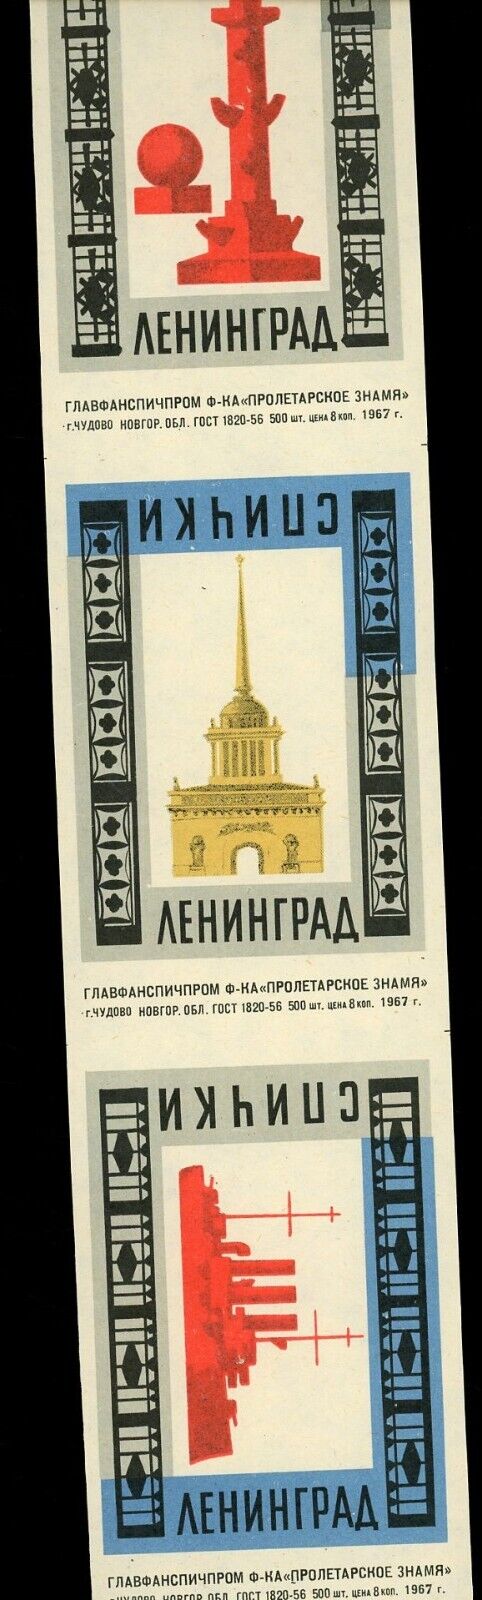 1967 Uncut Sheet of Russian 3x4 Match Book Labels Architecture and Battleship Без бренда